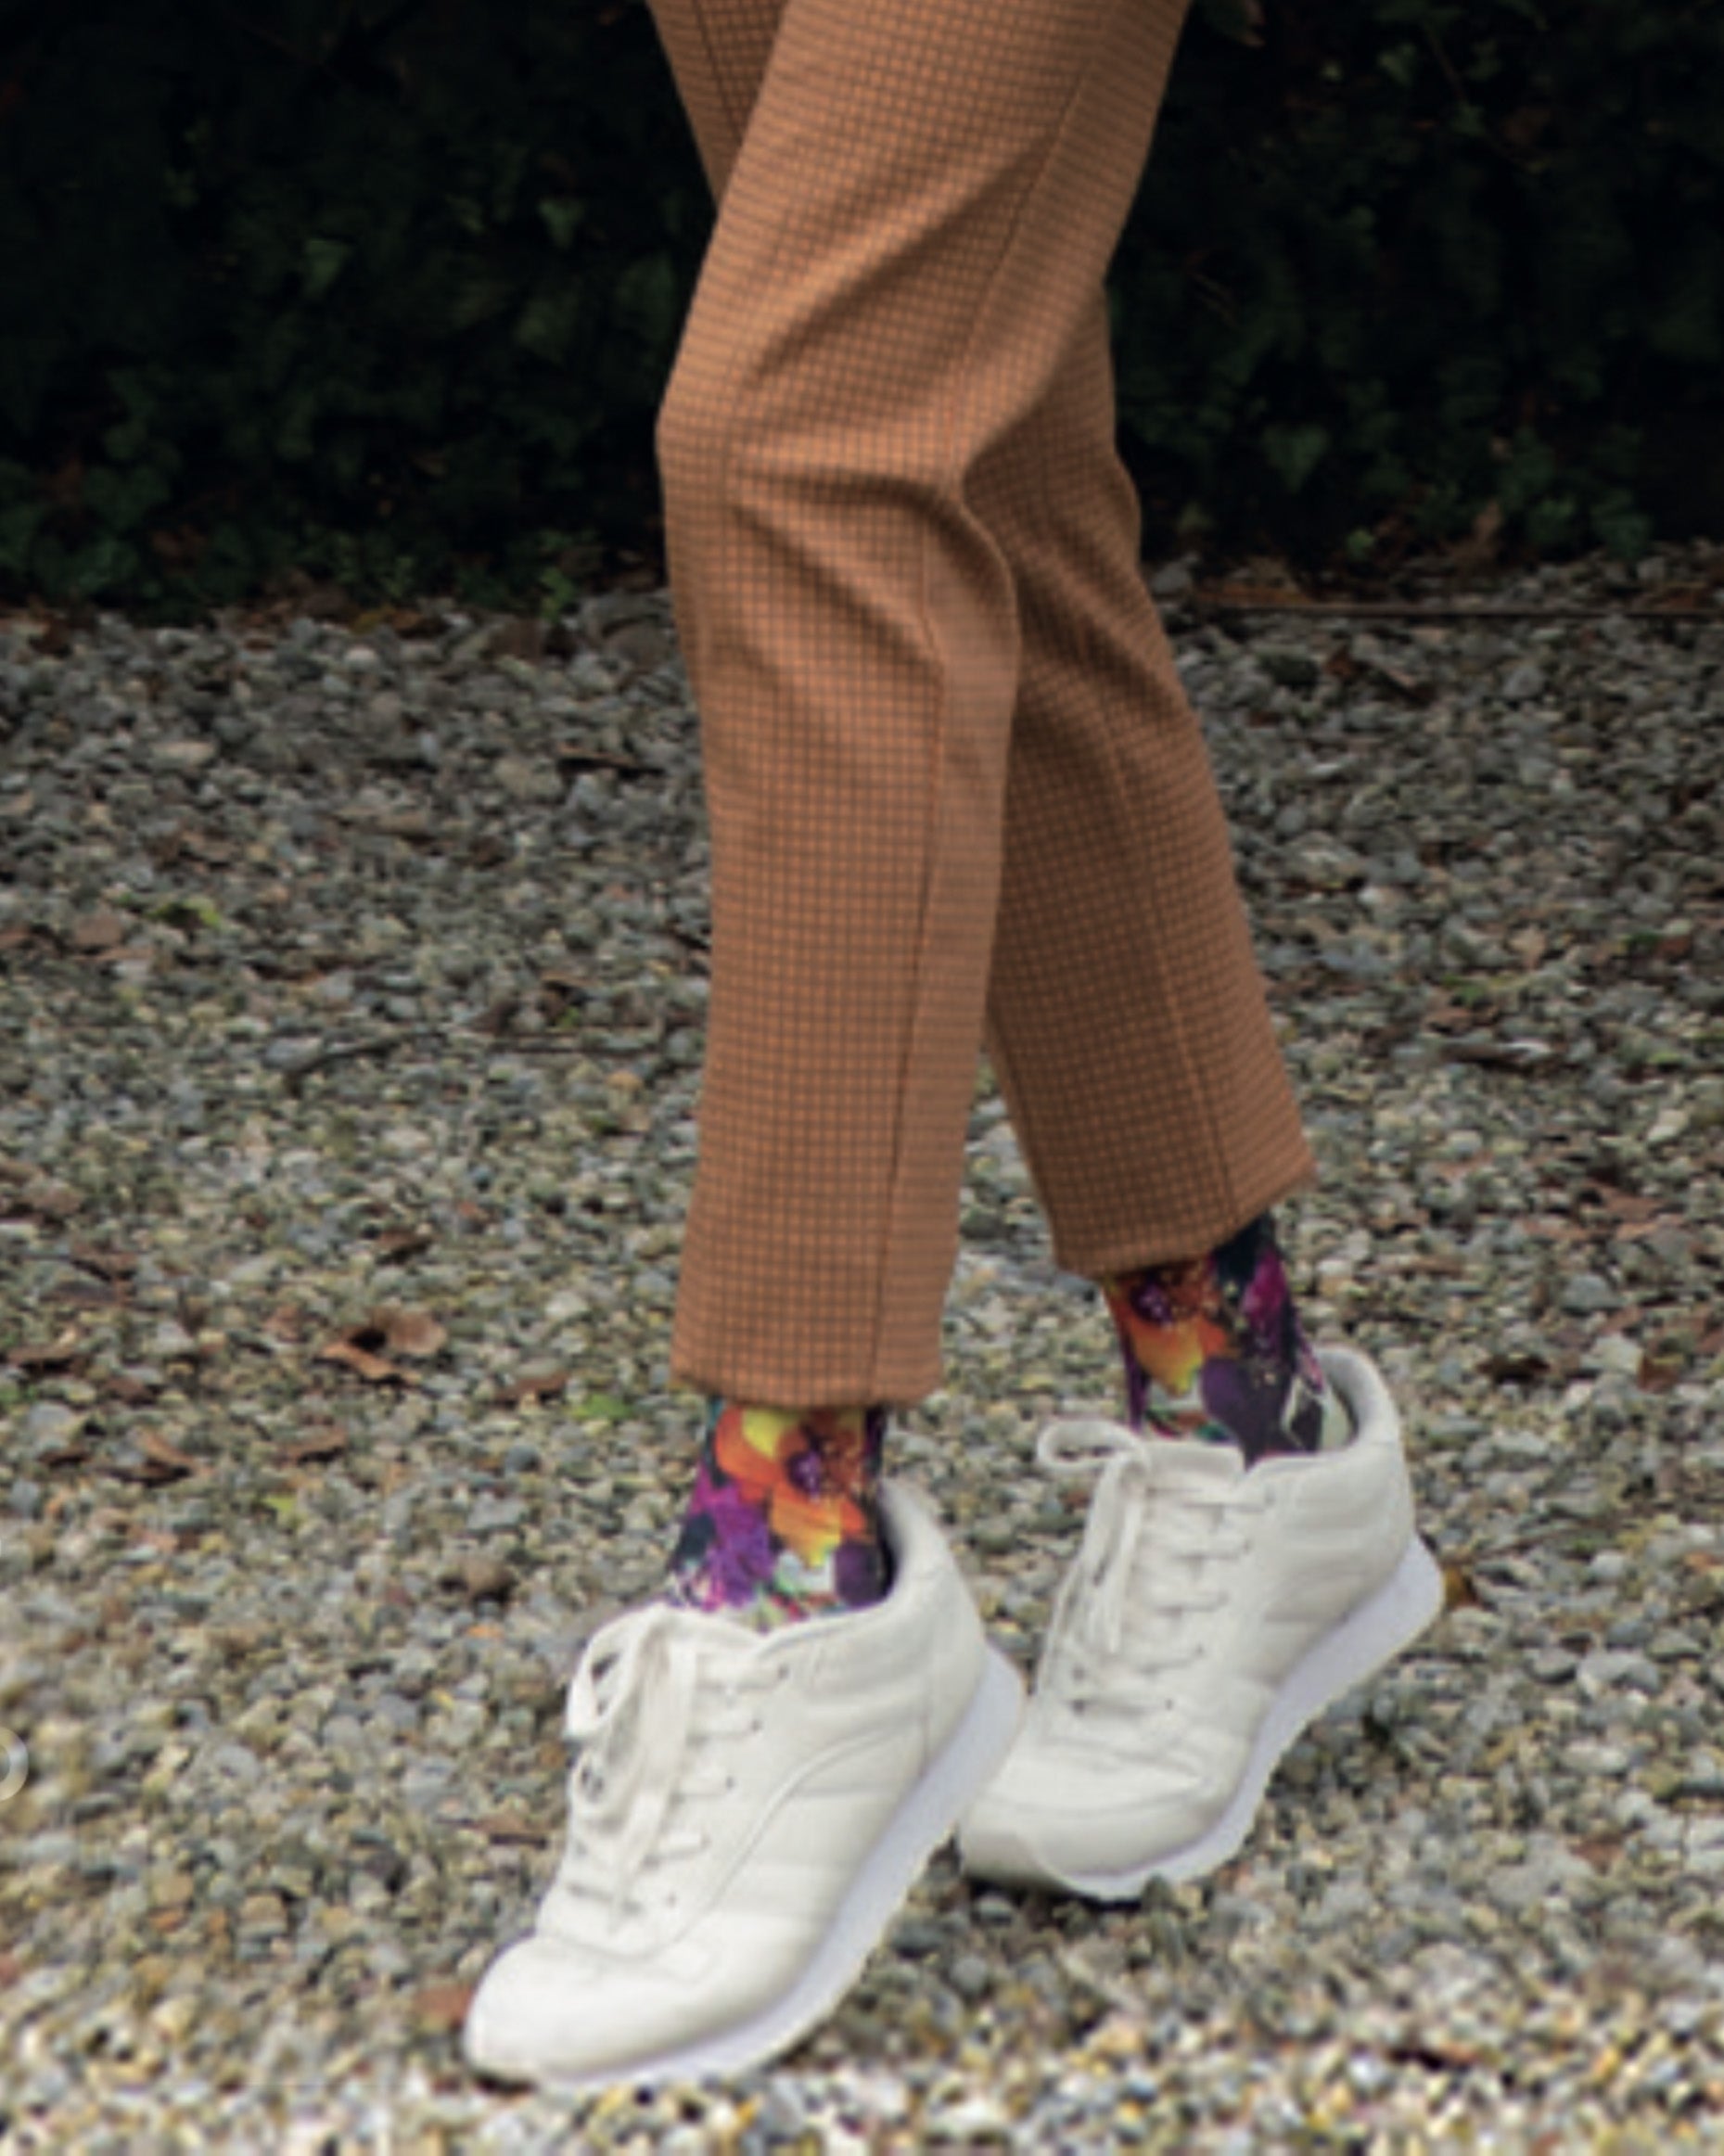 Omero Fantasy (Flowers) Calzino - Opaque fashion ankle socks with an all over digital print of colourful flowers, worn with camel pants and white trainers.